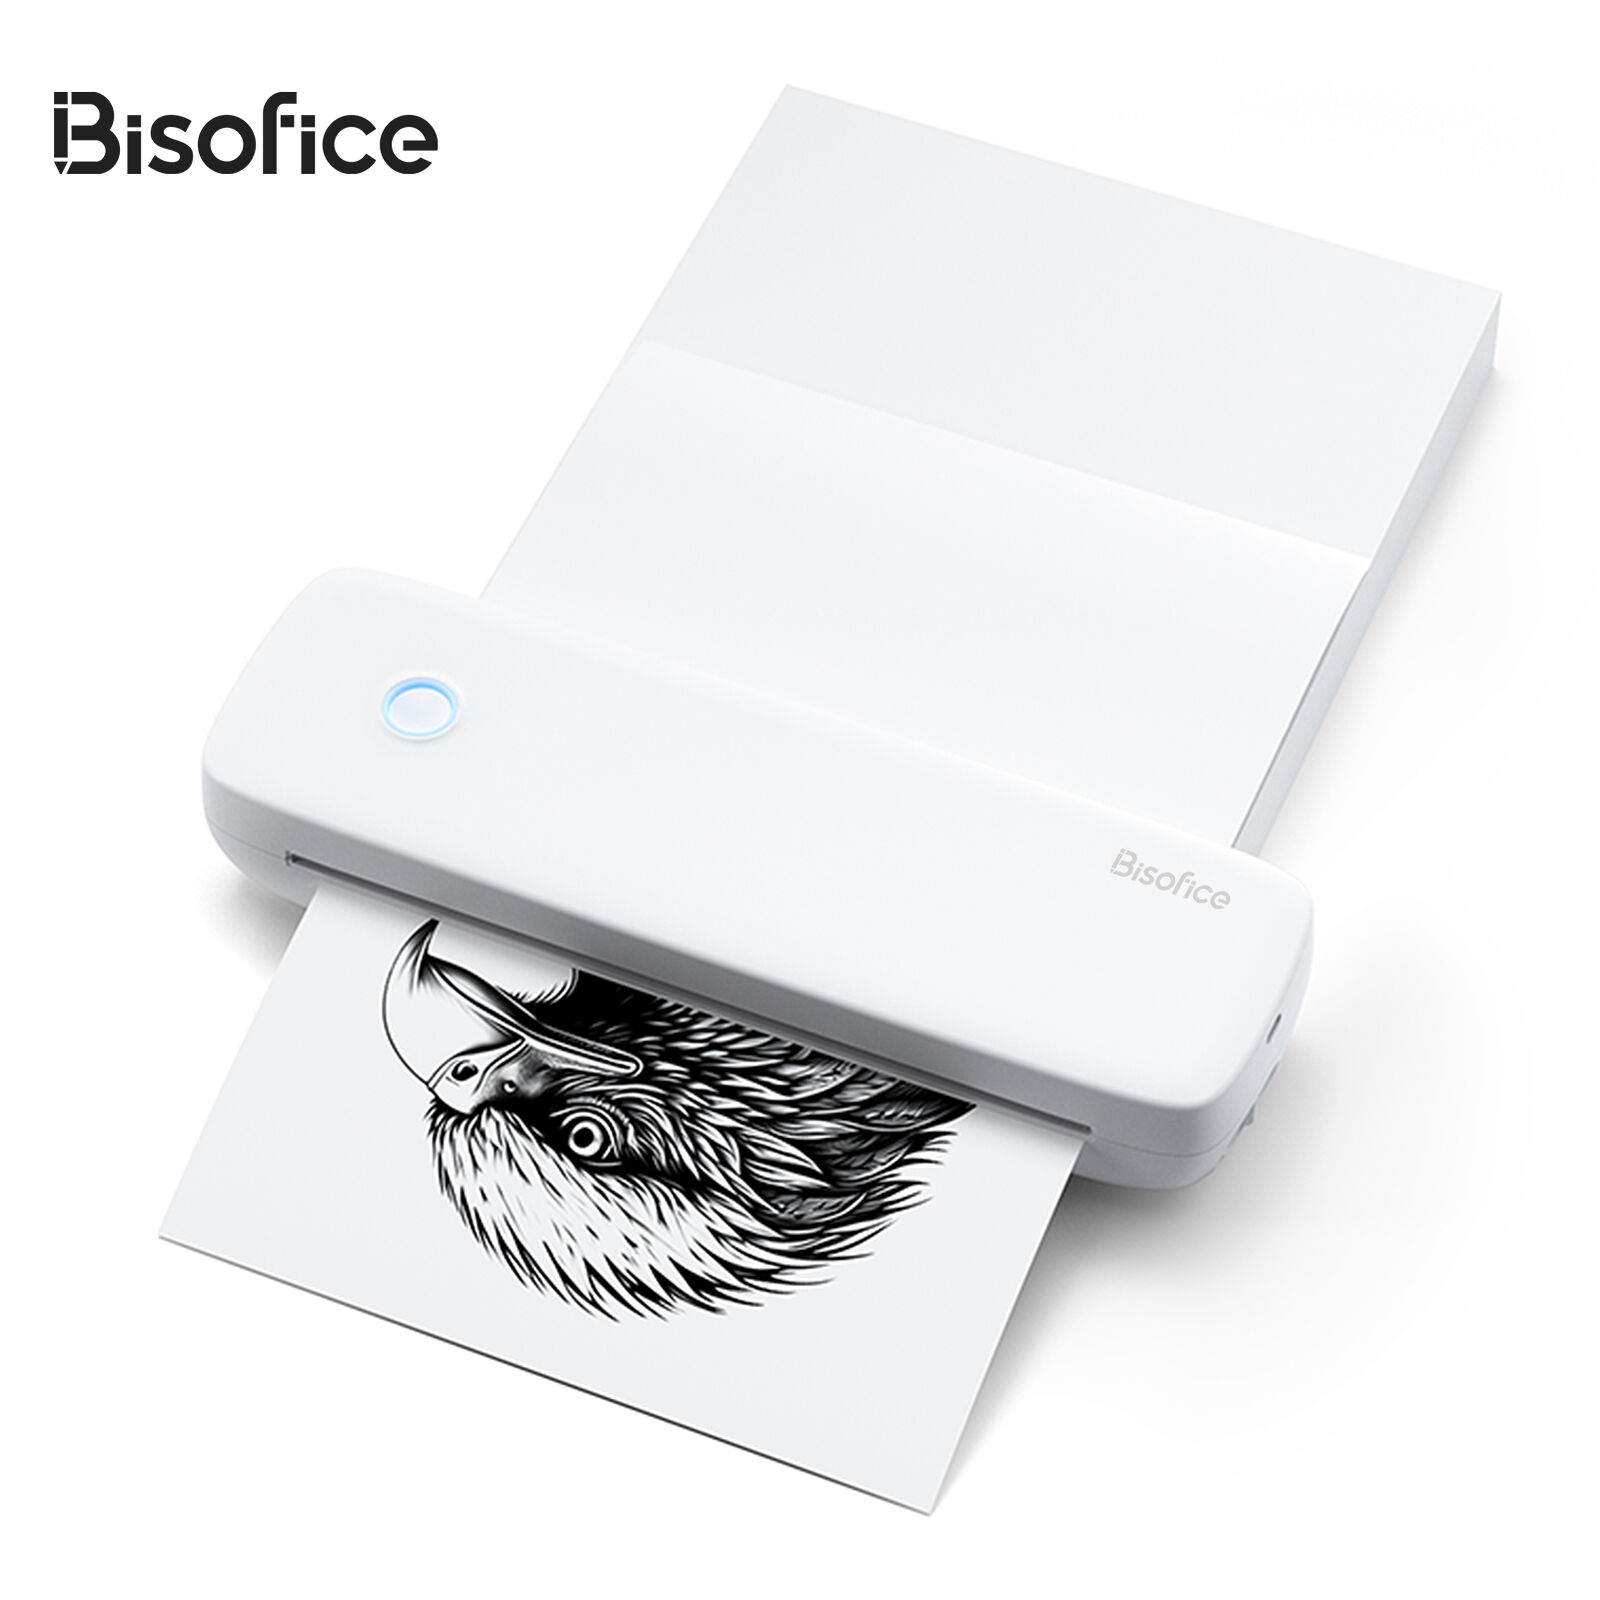 Bisofice A4 Portable Thermal Transfer Printer Wireless&USB Connect Connect S7E6